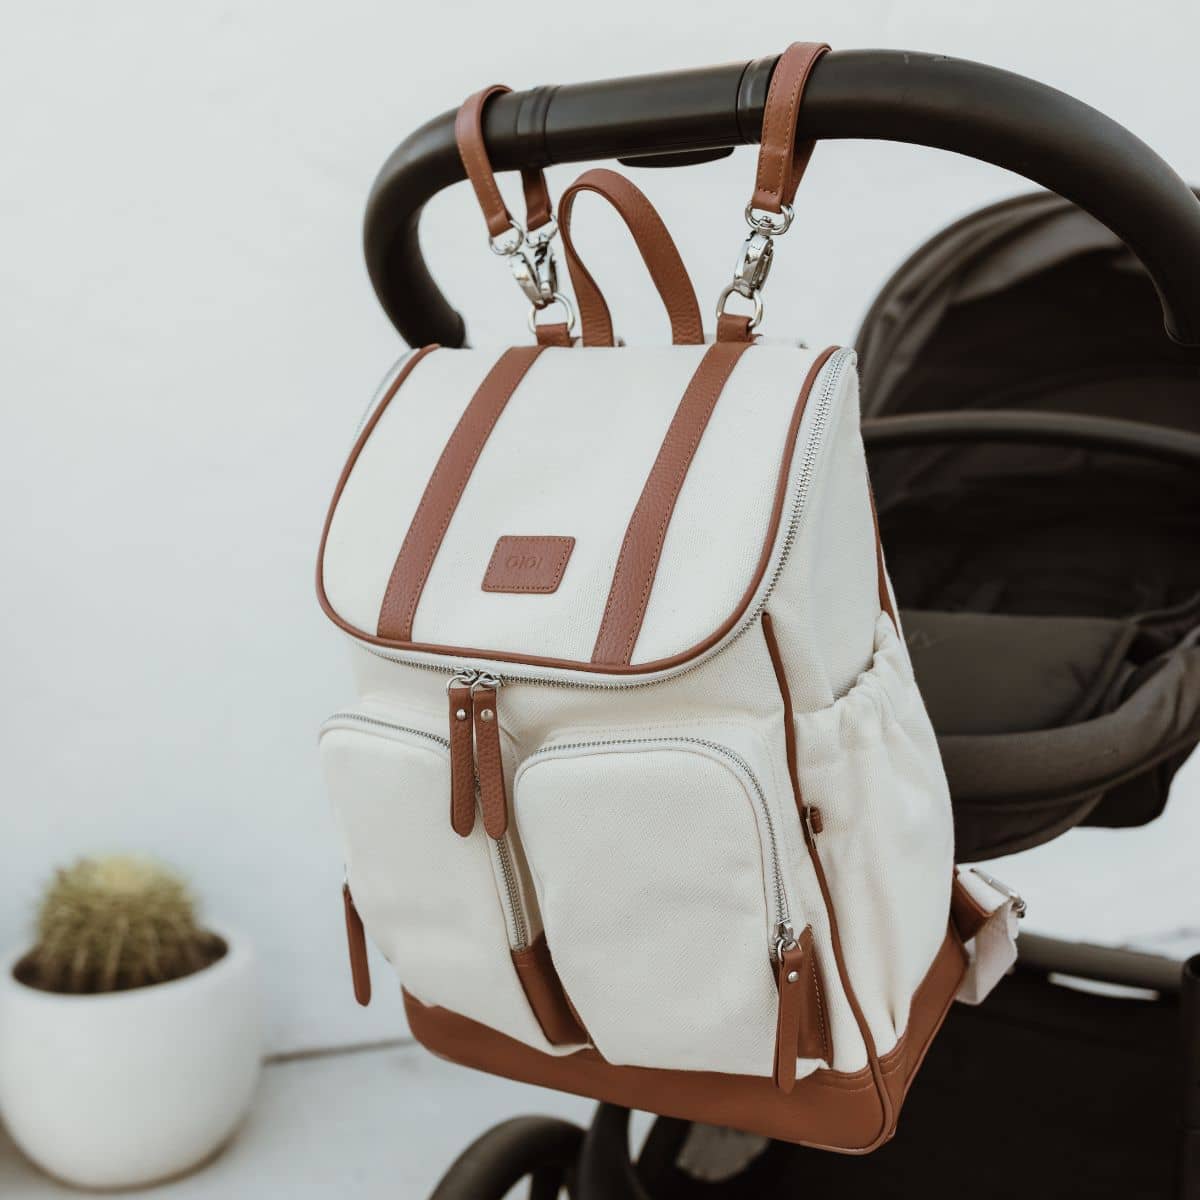 OiOi Canvas/Leather Nappy Backpack - Natural/Terracotta